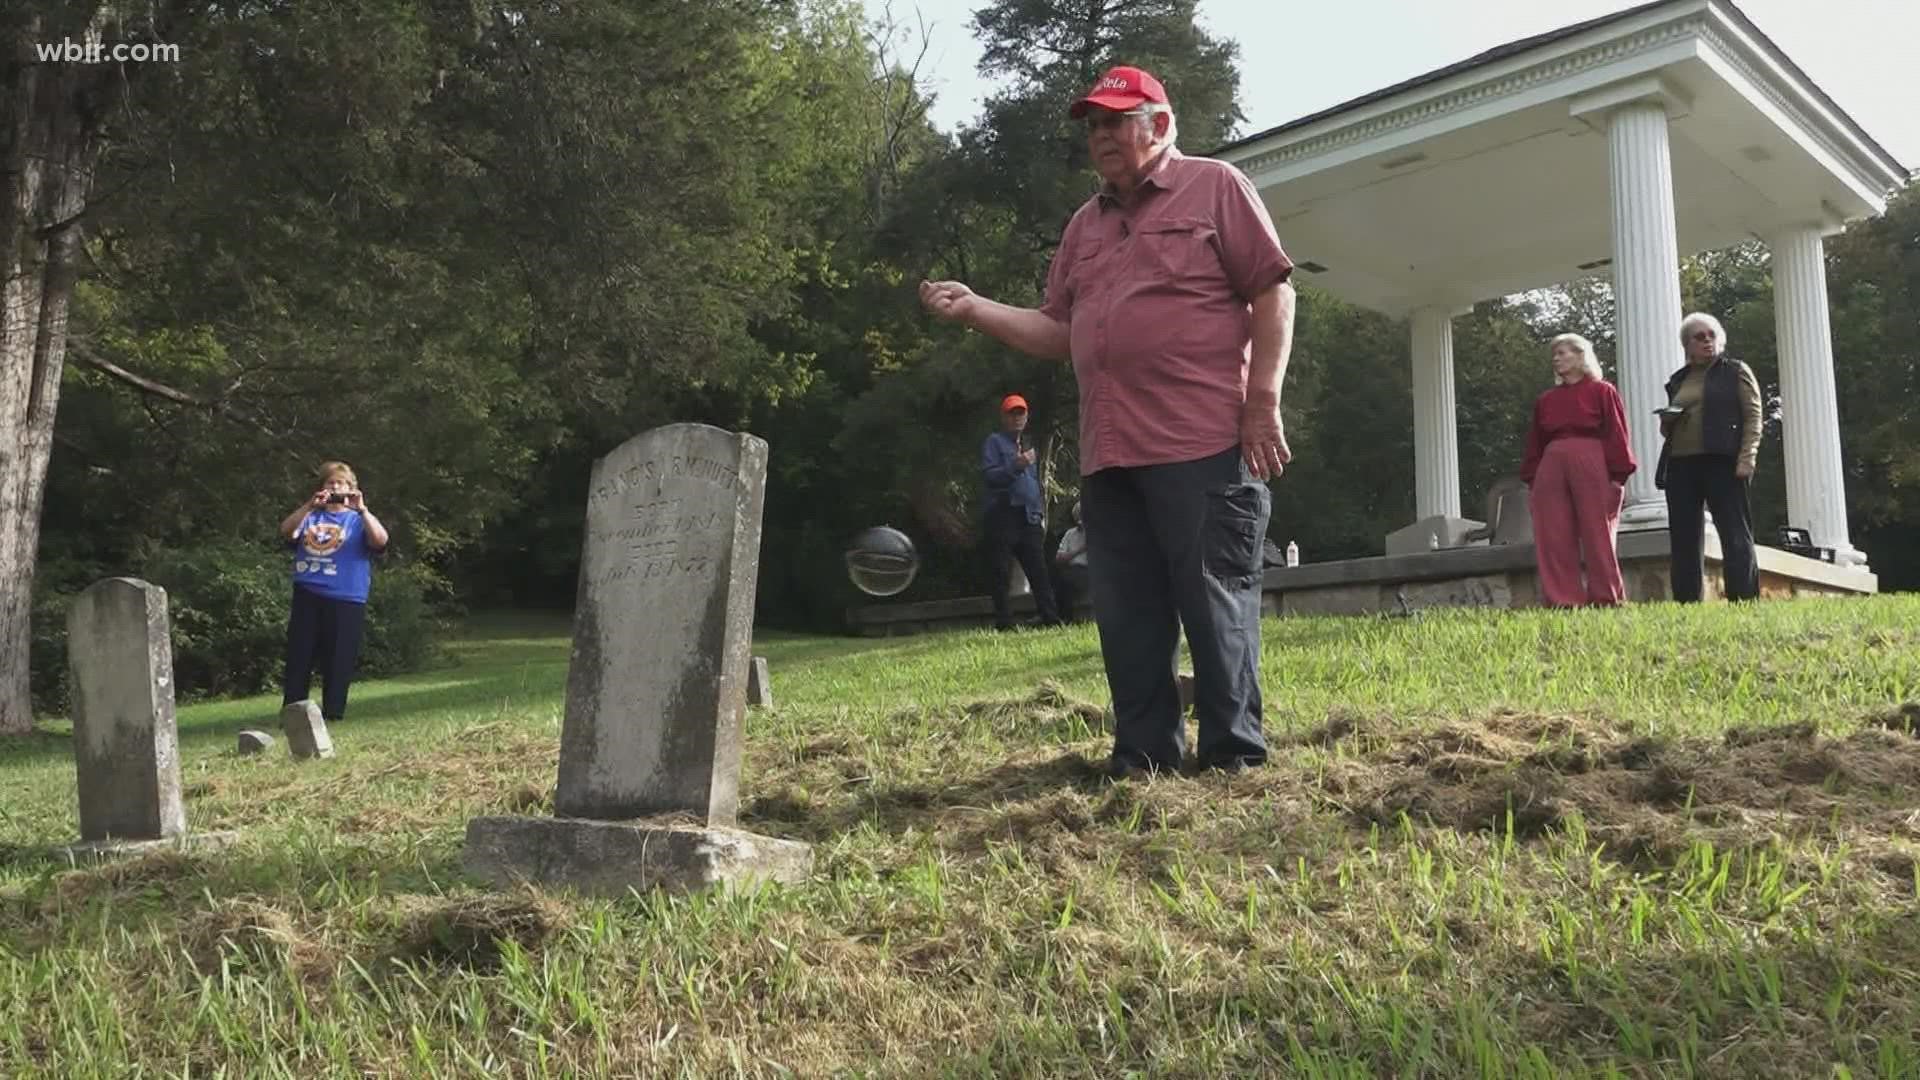 Two forensic experts say their new devices can find bones buried in unmarked graves that in some cases are centuries old.